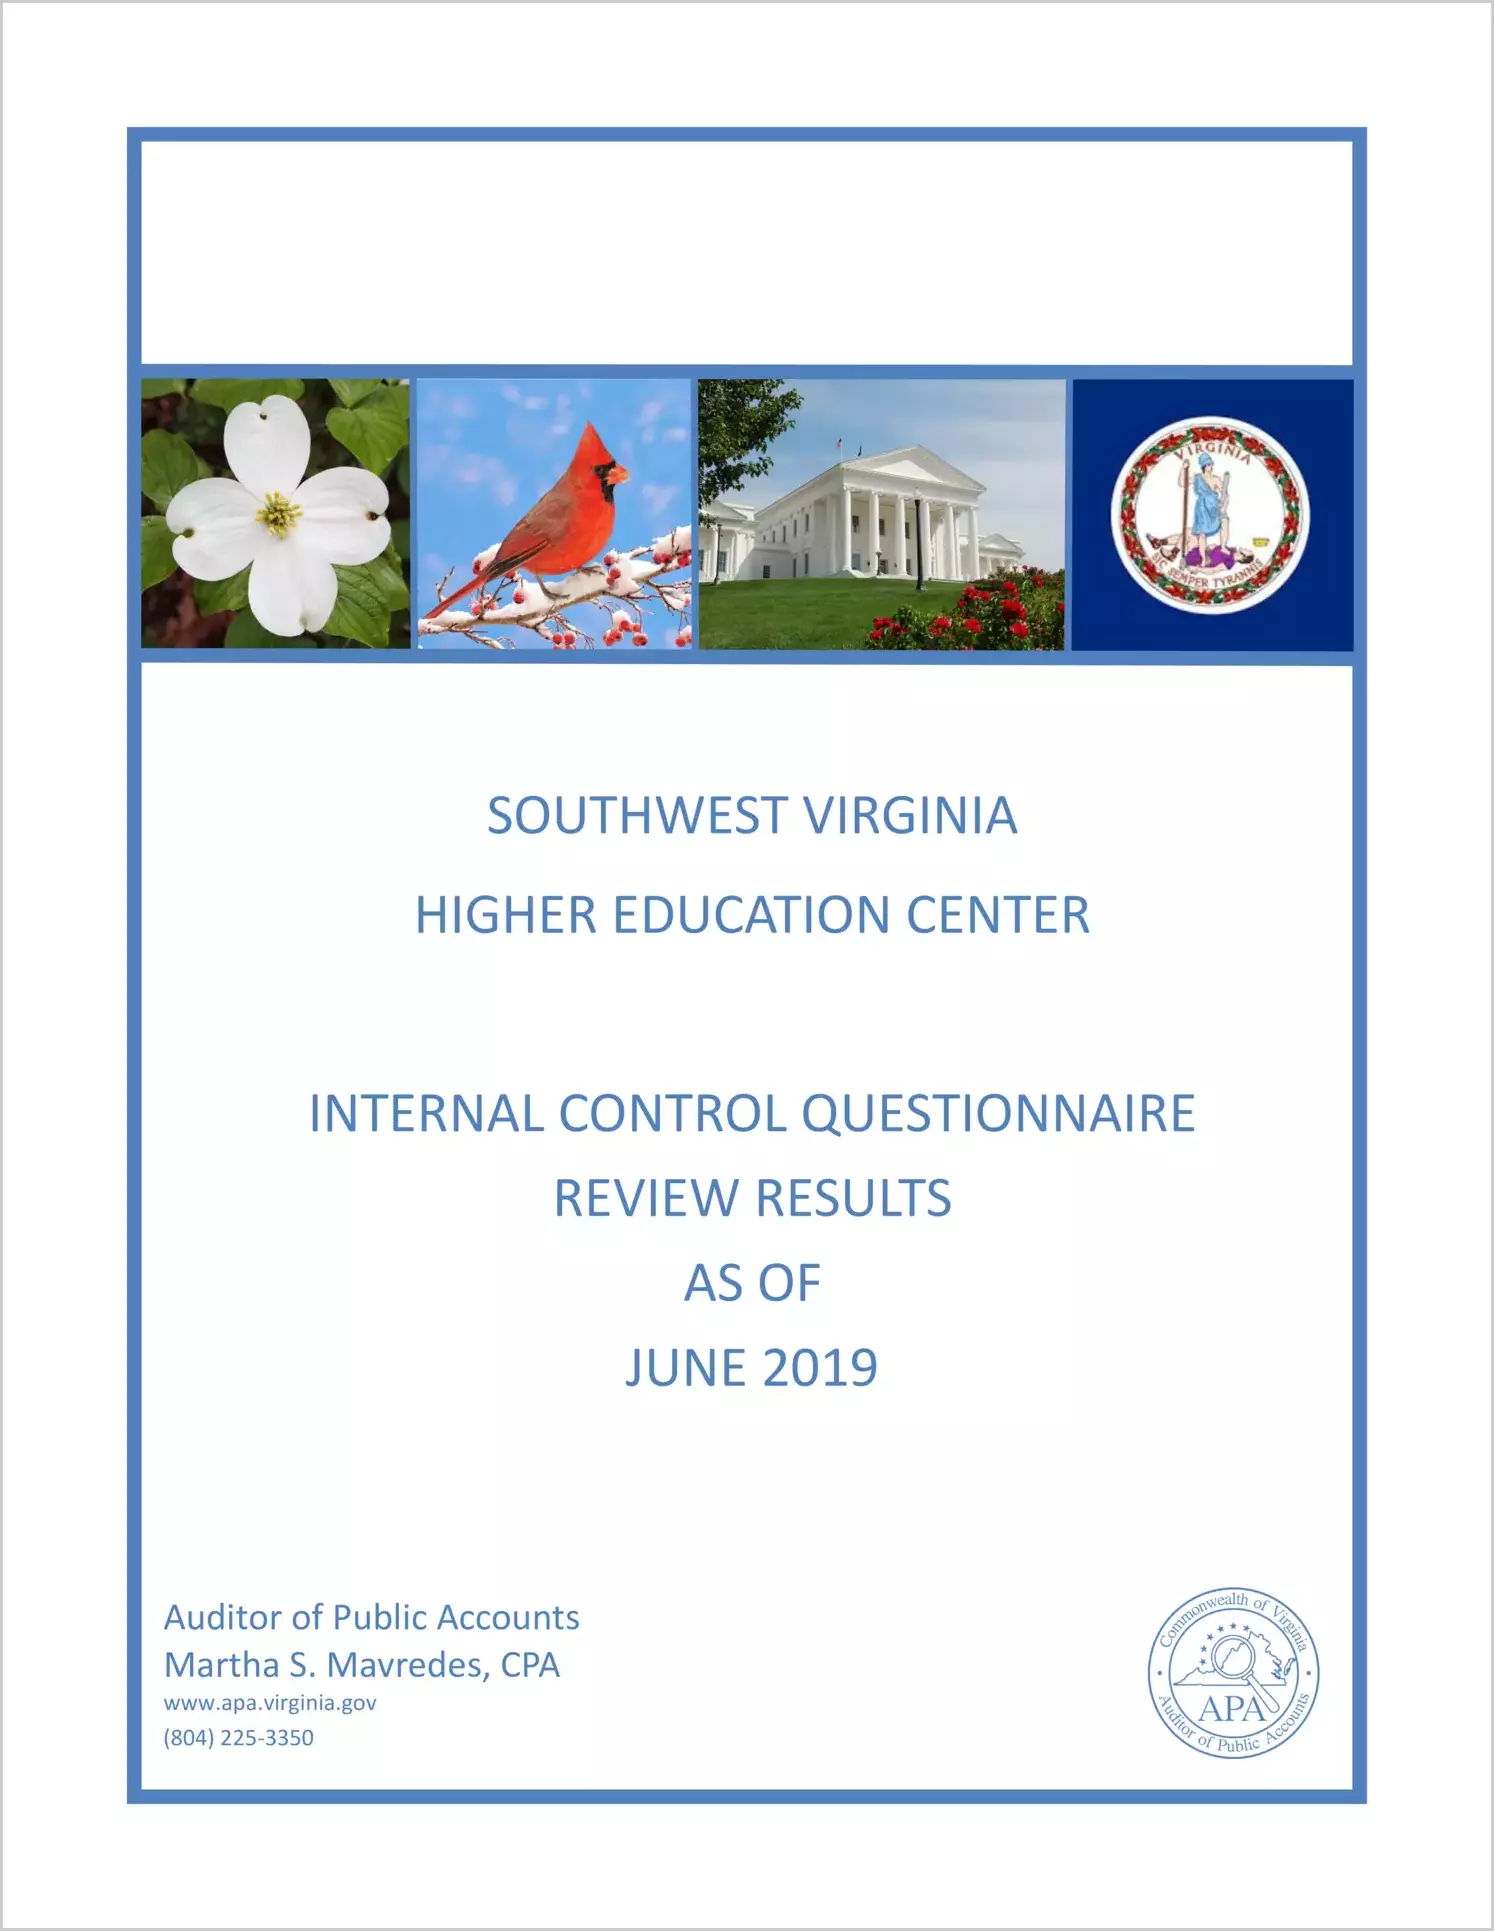 Southwest Virginia Higher Education Center Internal Control Questionnaire Review Results as of June 2019